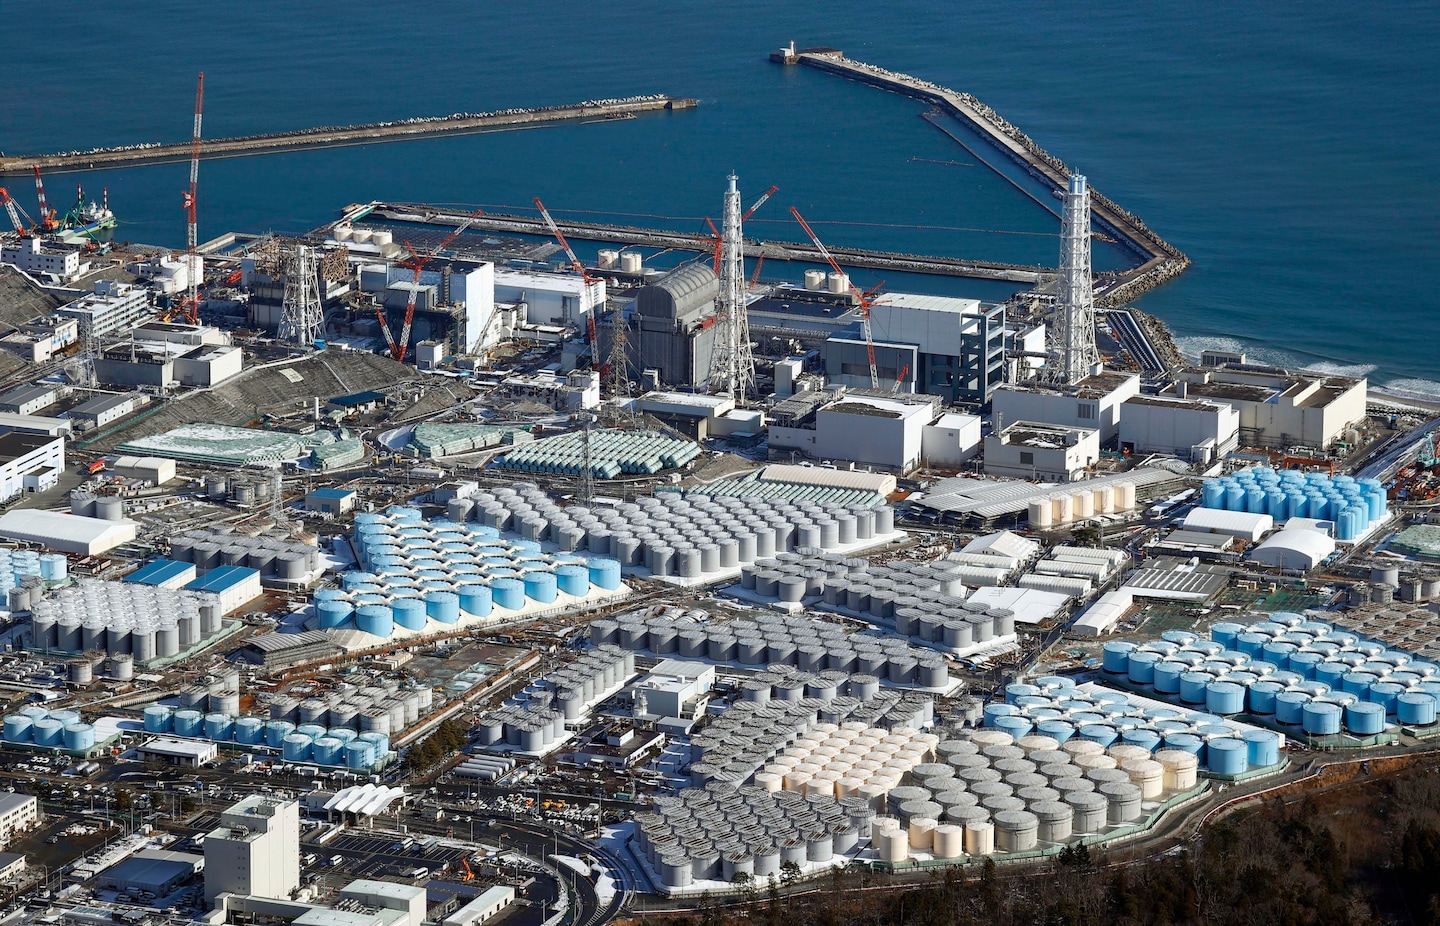 Japan to release Fukushima nuclear plant water into ocean after treatment